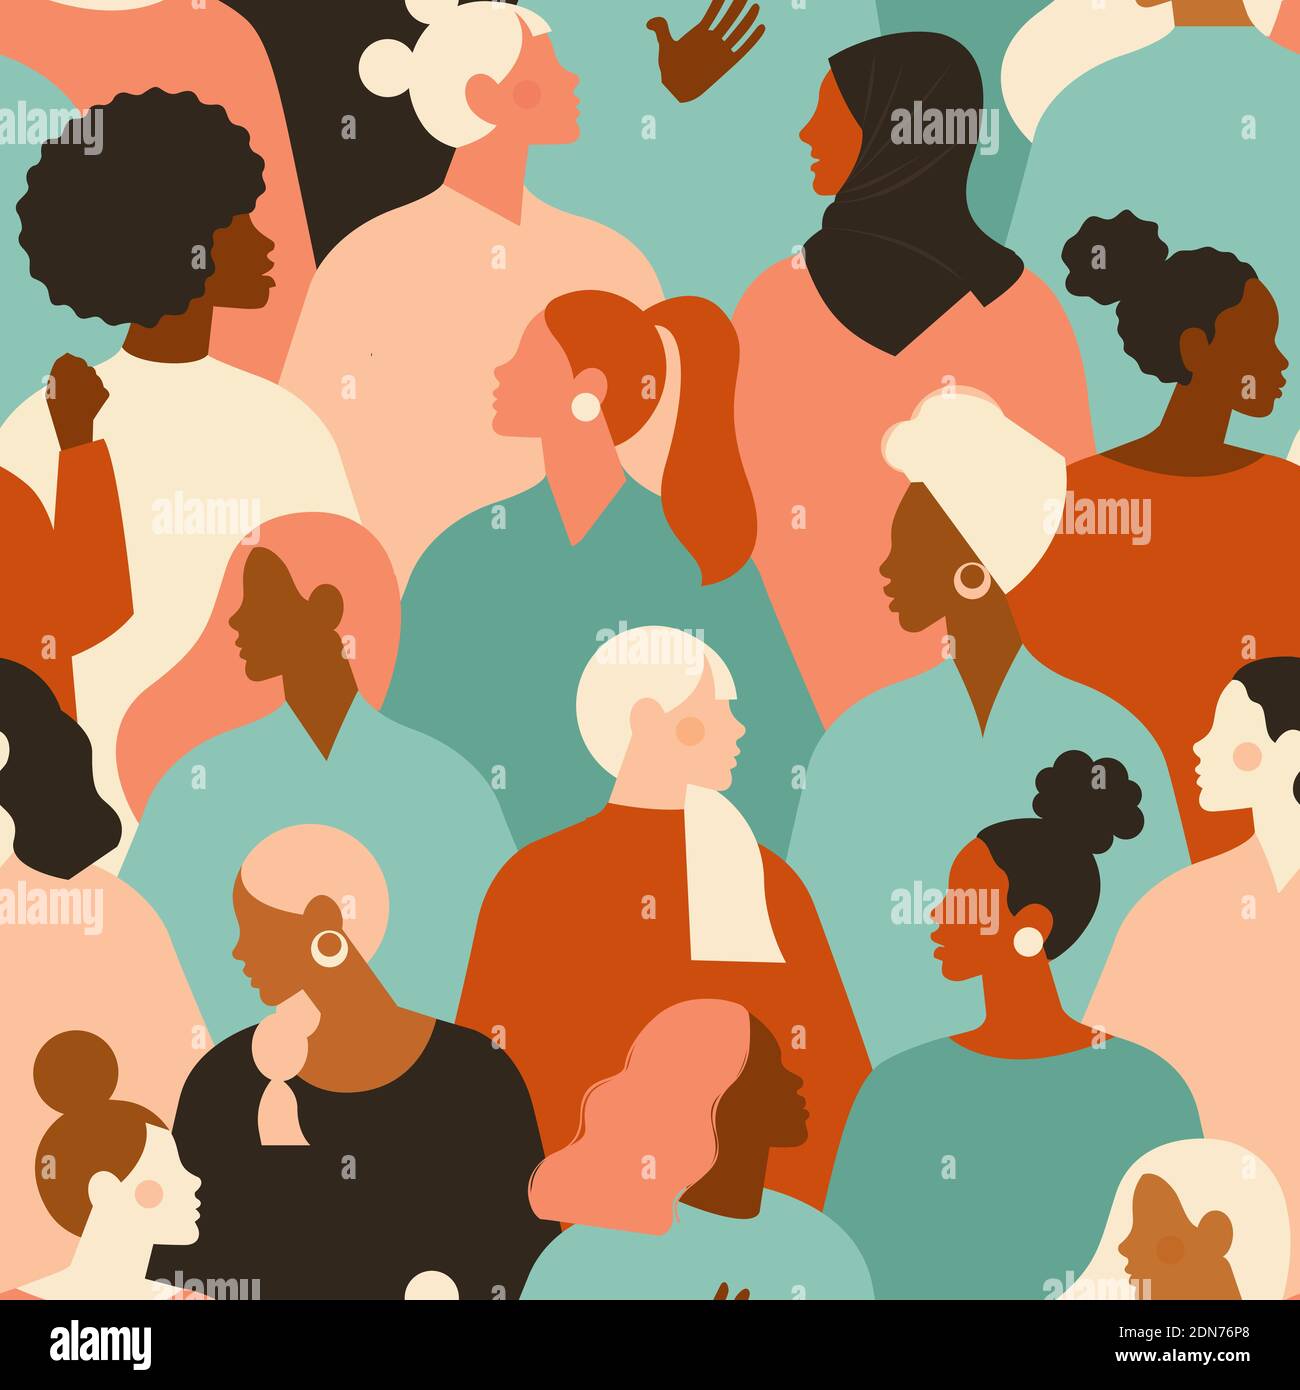 https://c8.alamy.com/comp/2DN76P8/female-diverse-faces-of-different-ethnicity-seamless-pattern-women-empowerment-movement-pattern-international-womens-day-graphic-in-vector-2DN76P8.jpg